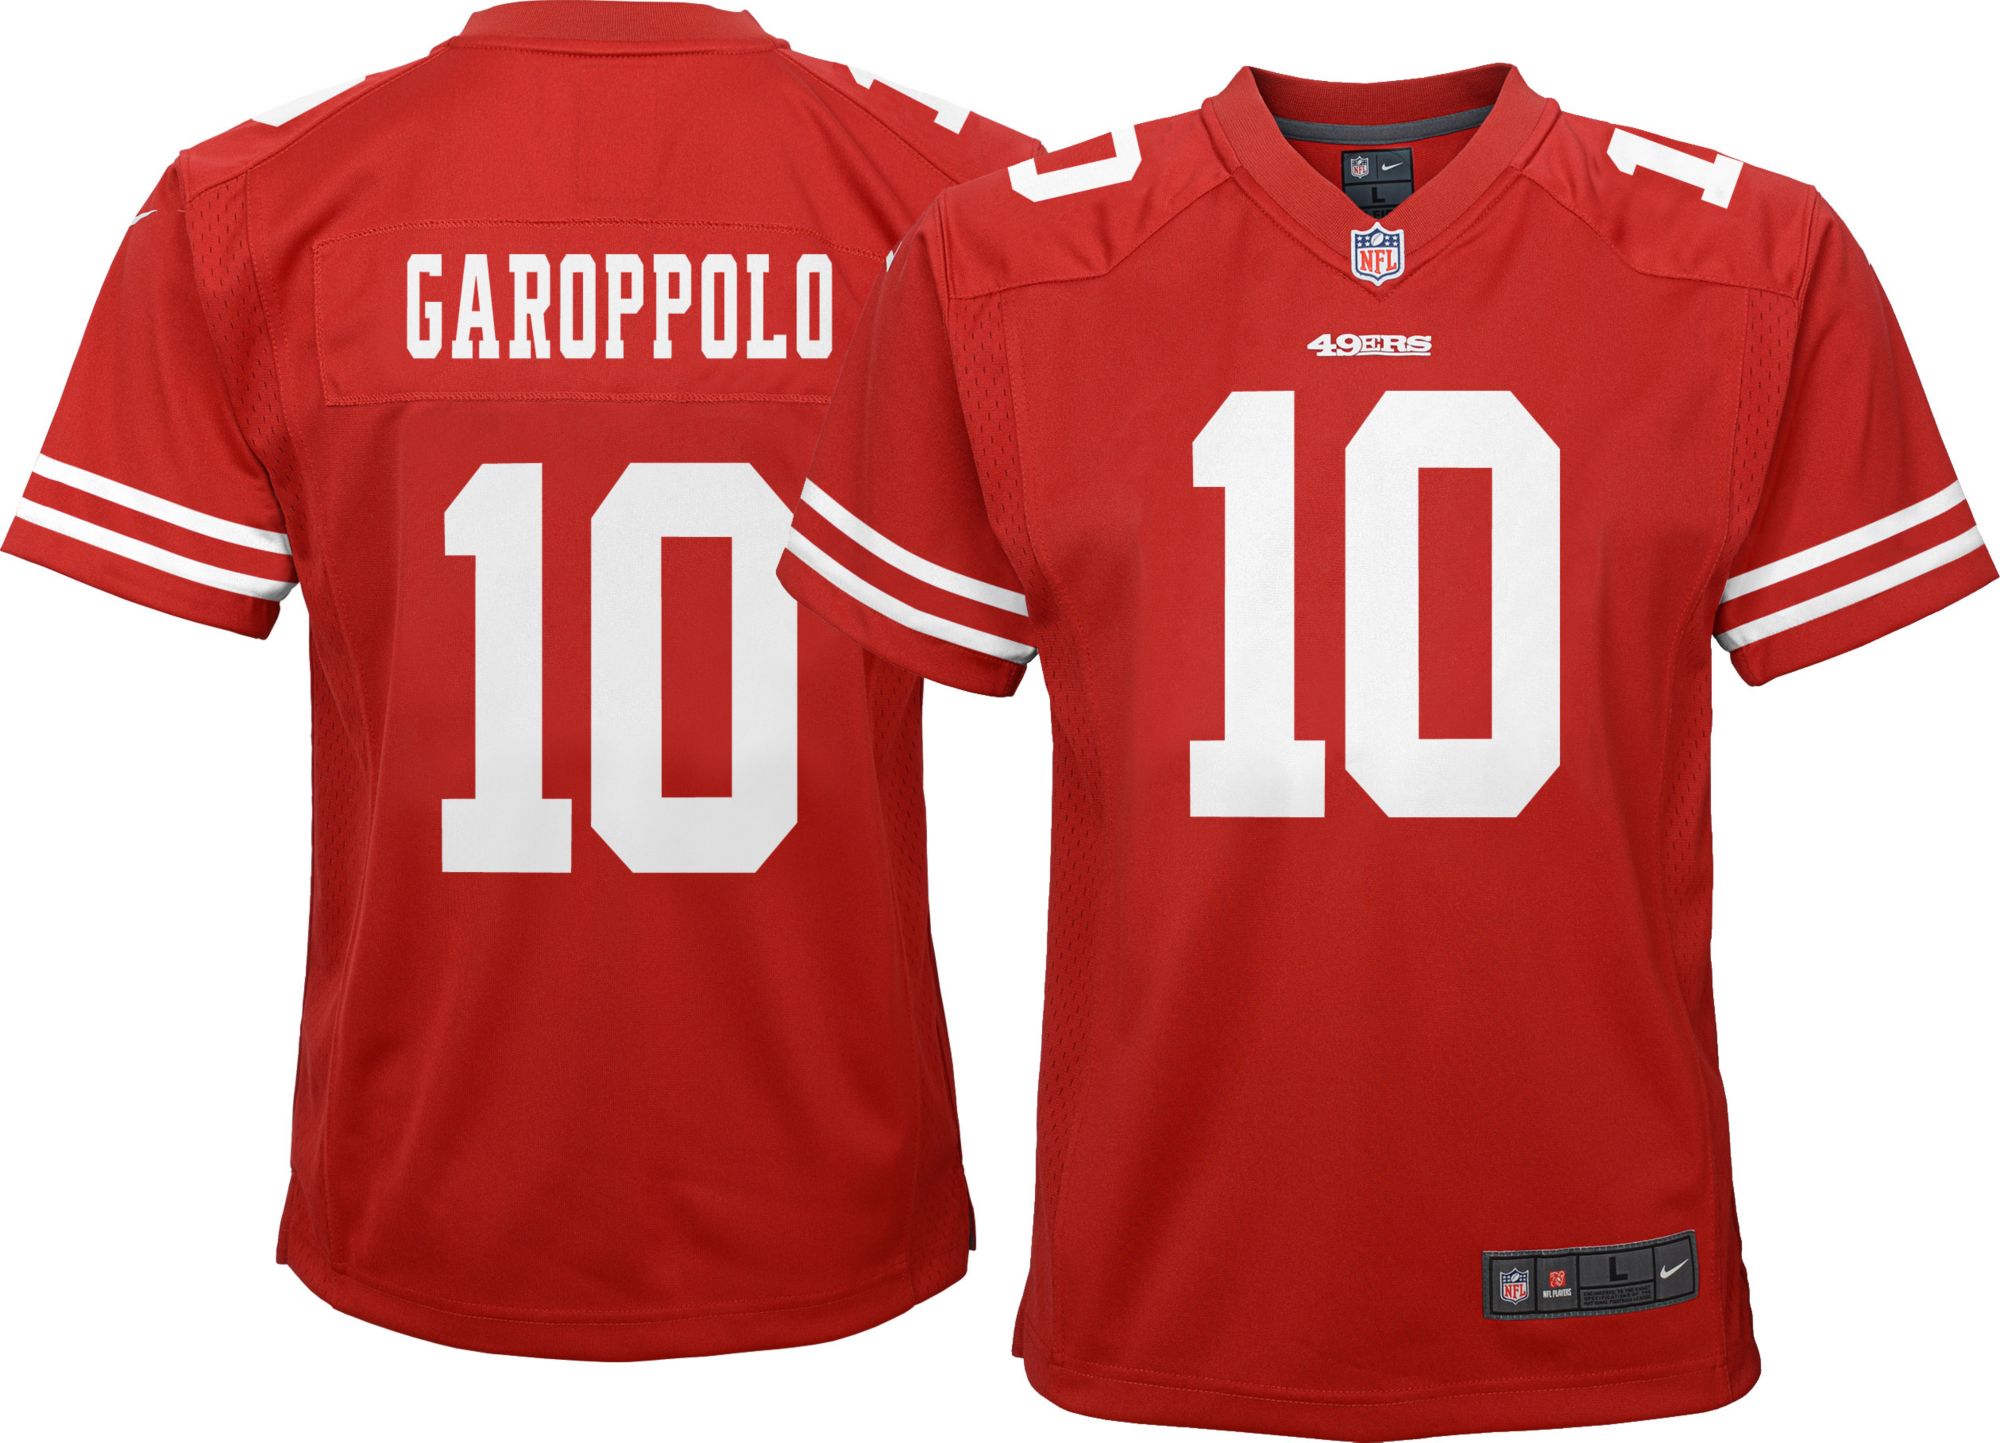 niners jersey